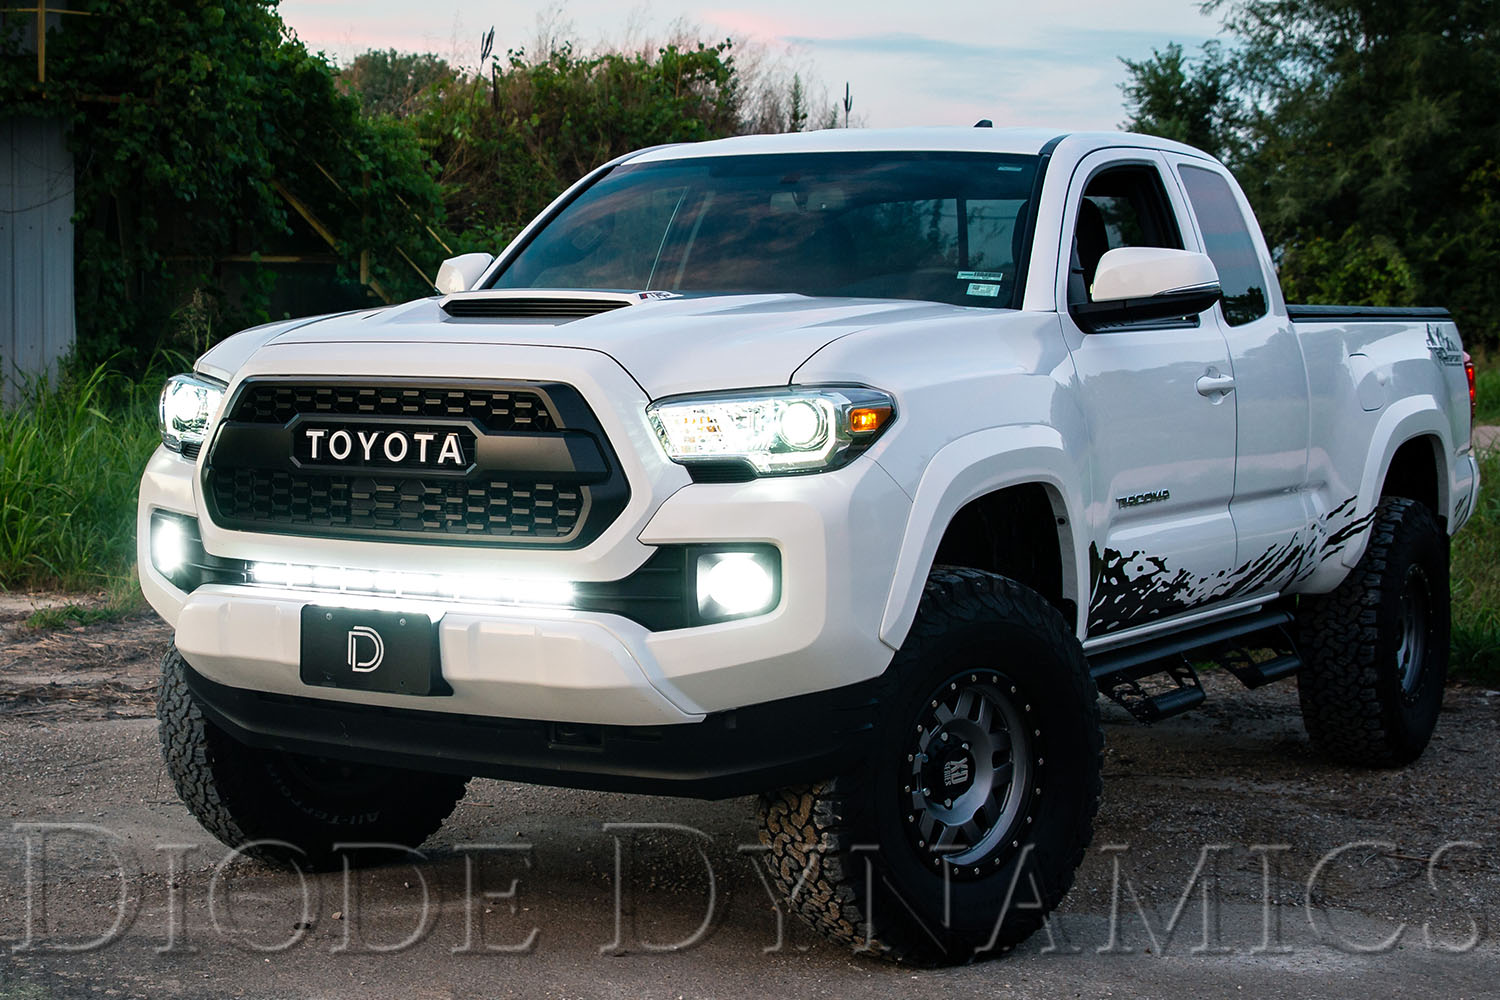 Top LED Lighting Upgrades for the Toyota Tacoma